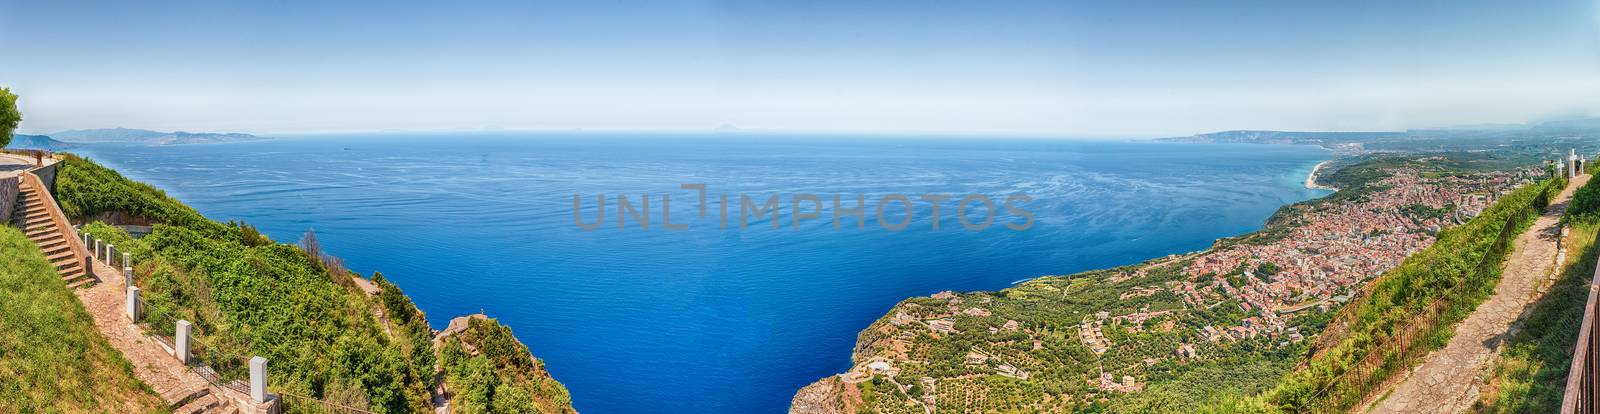 View of the town of Palmi from Mount Sant'Elia, Italy by marcorubino